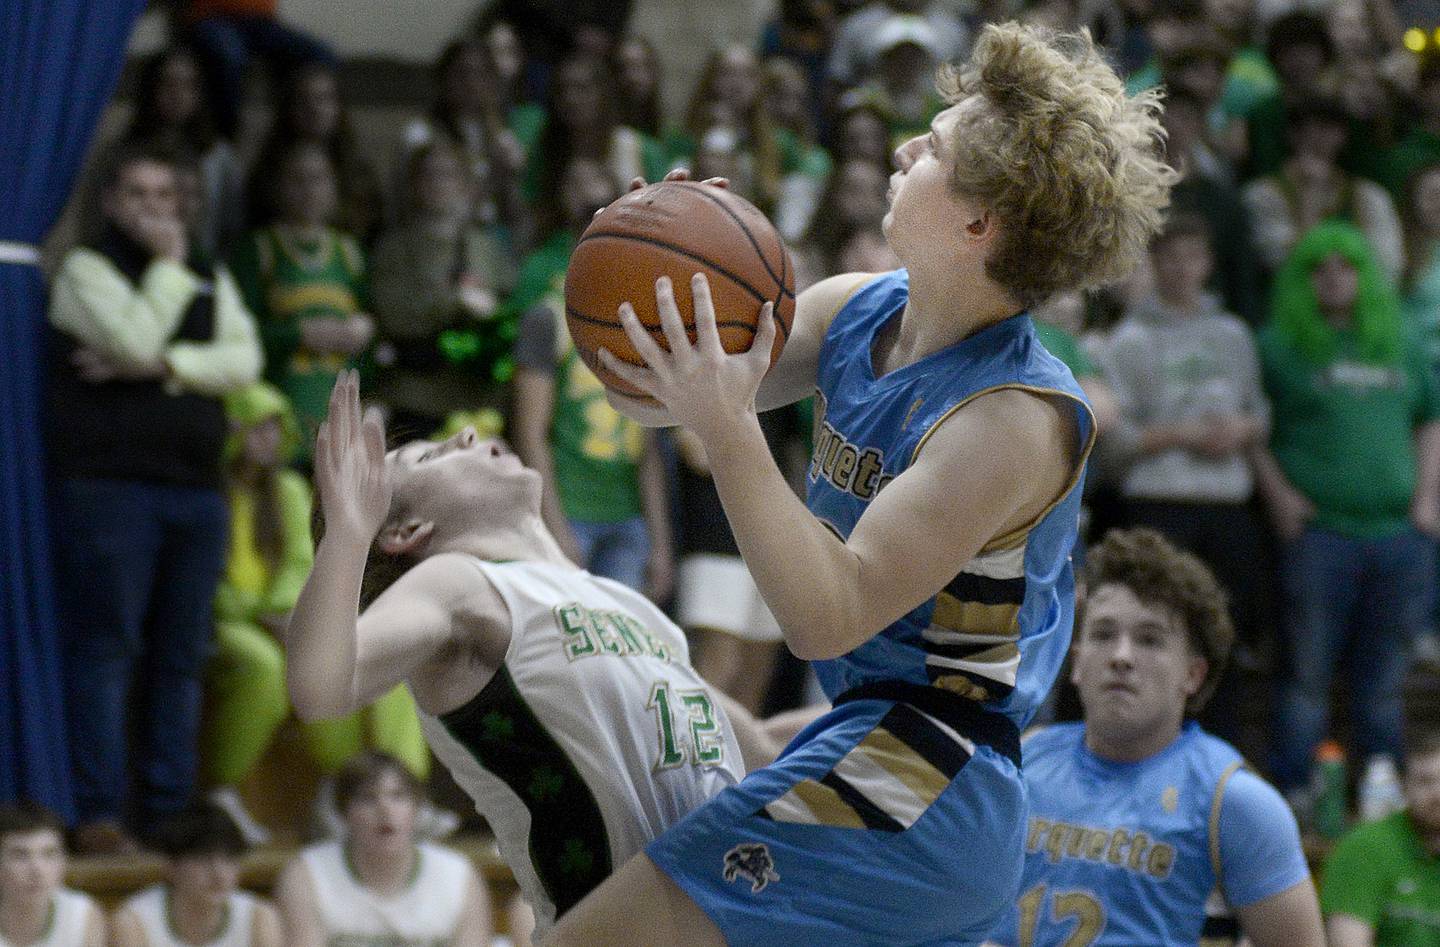 Marquette's Griffin Walker flies into Seneca's Braden Ellis (12) during the Marquette Christmas Tournament championship game in Ottawa on Thursday.